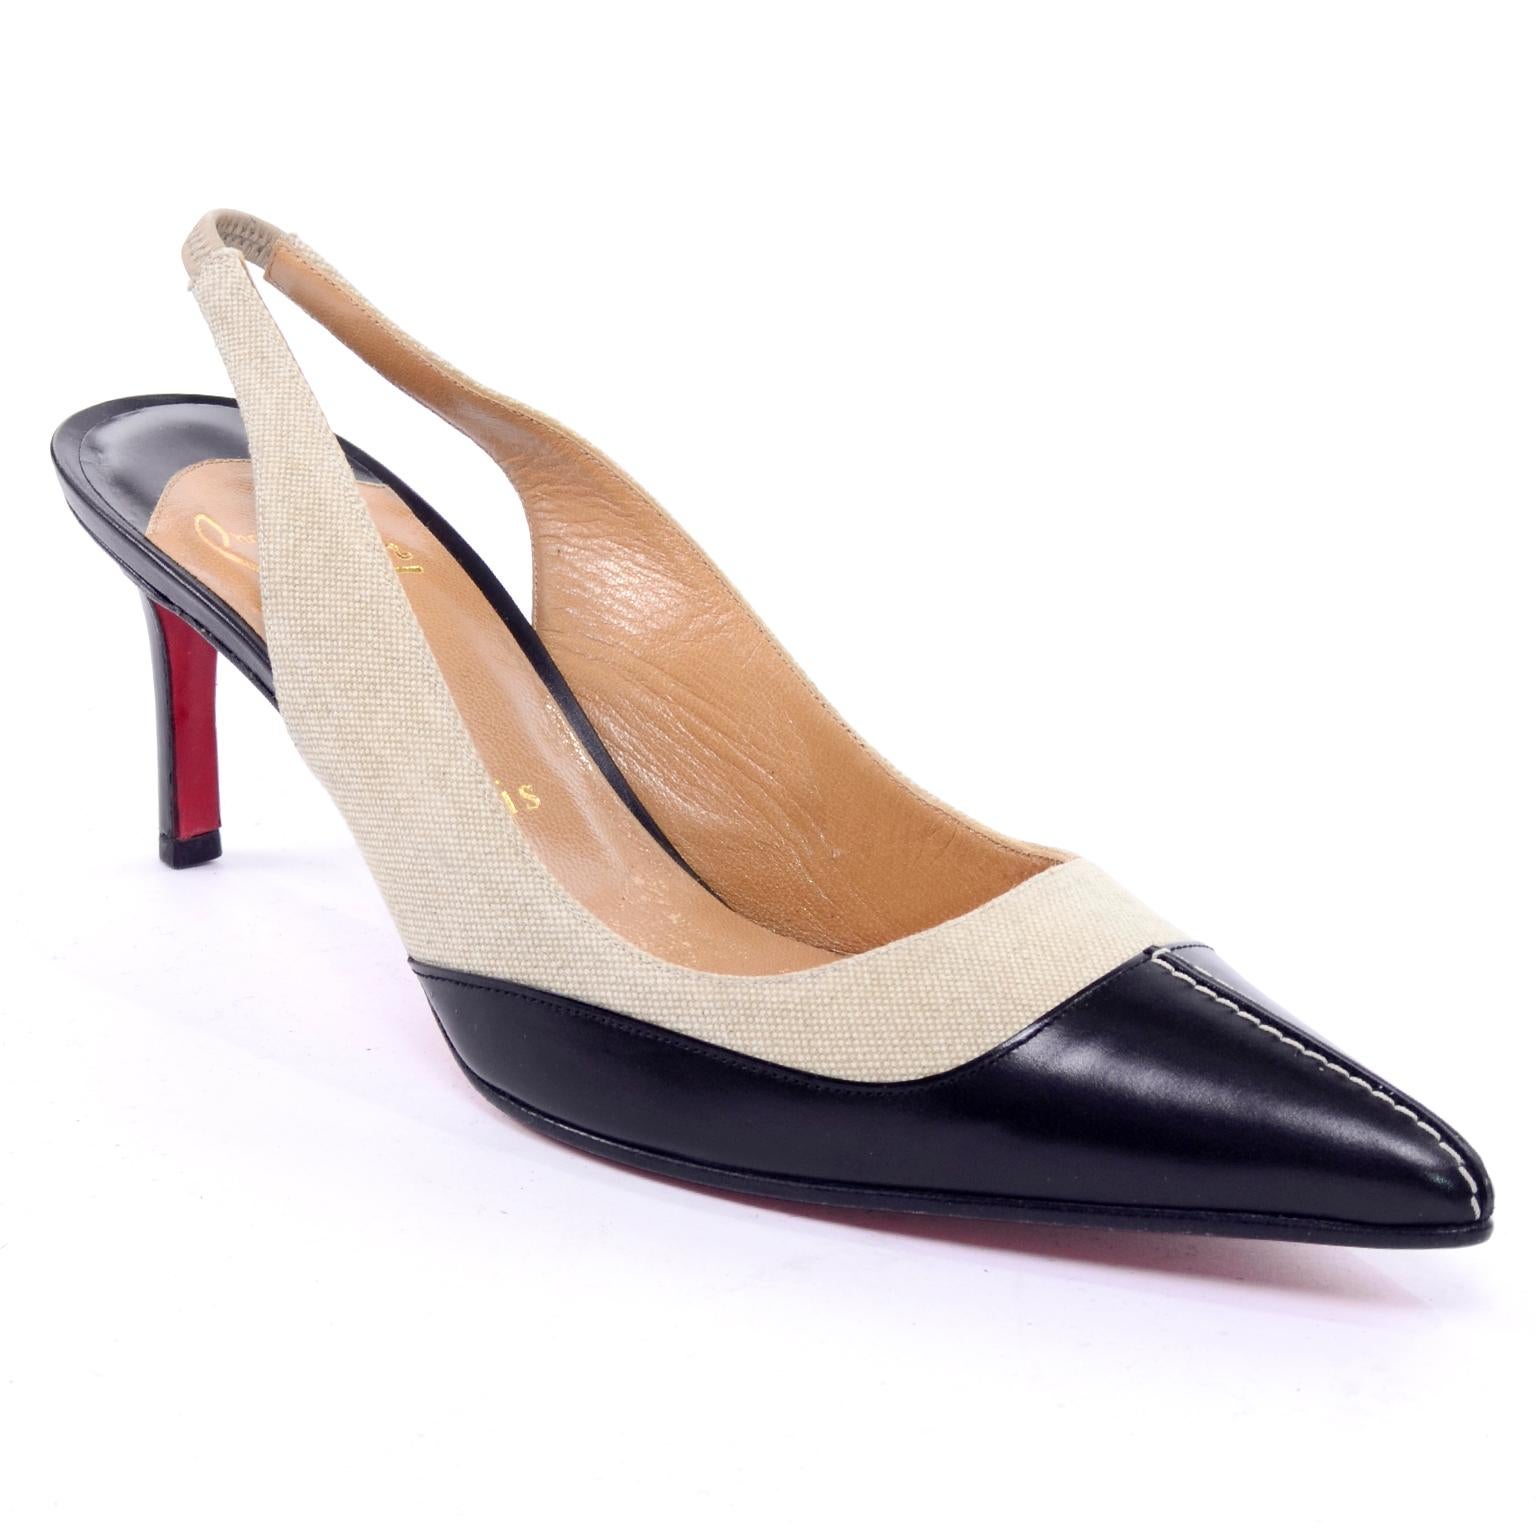 These are classic sling back shoes from Christian Louboutin with black leather and natural canvas.  The shoes have the red soles and there is topstitching on the toes.  Marked a size 38.5 which converts to a US size 8.5 or a UK size 5.5.  These